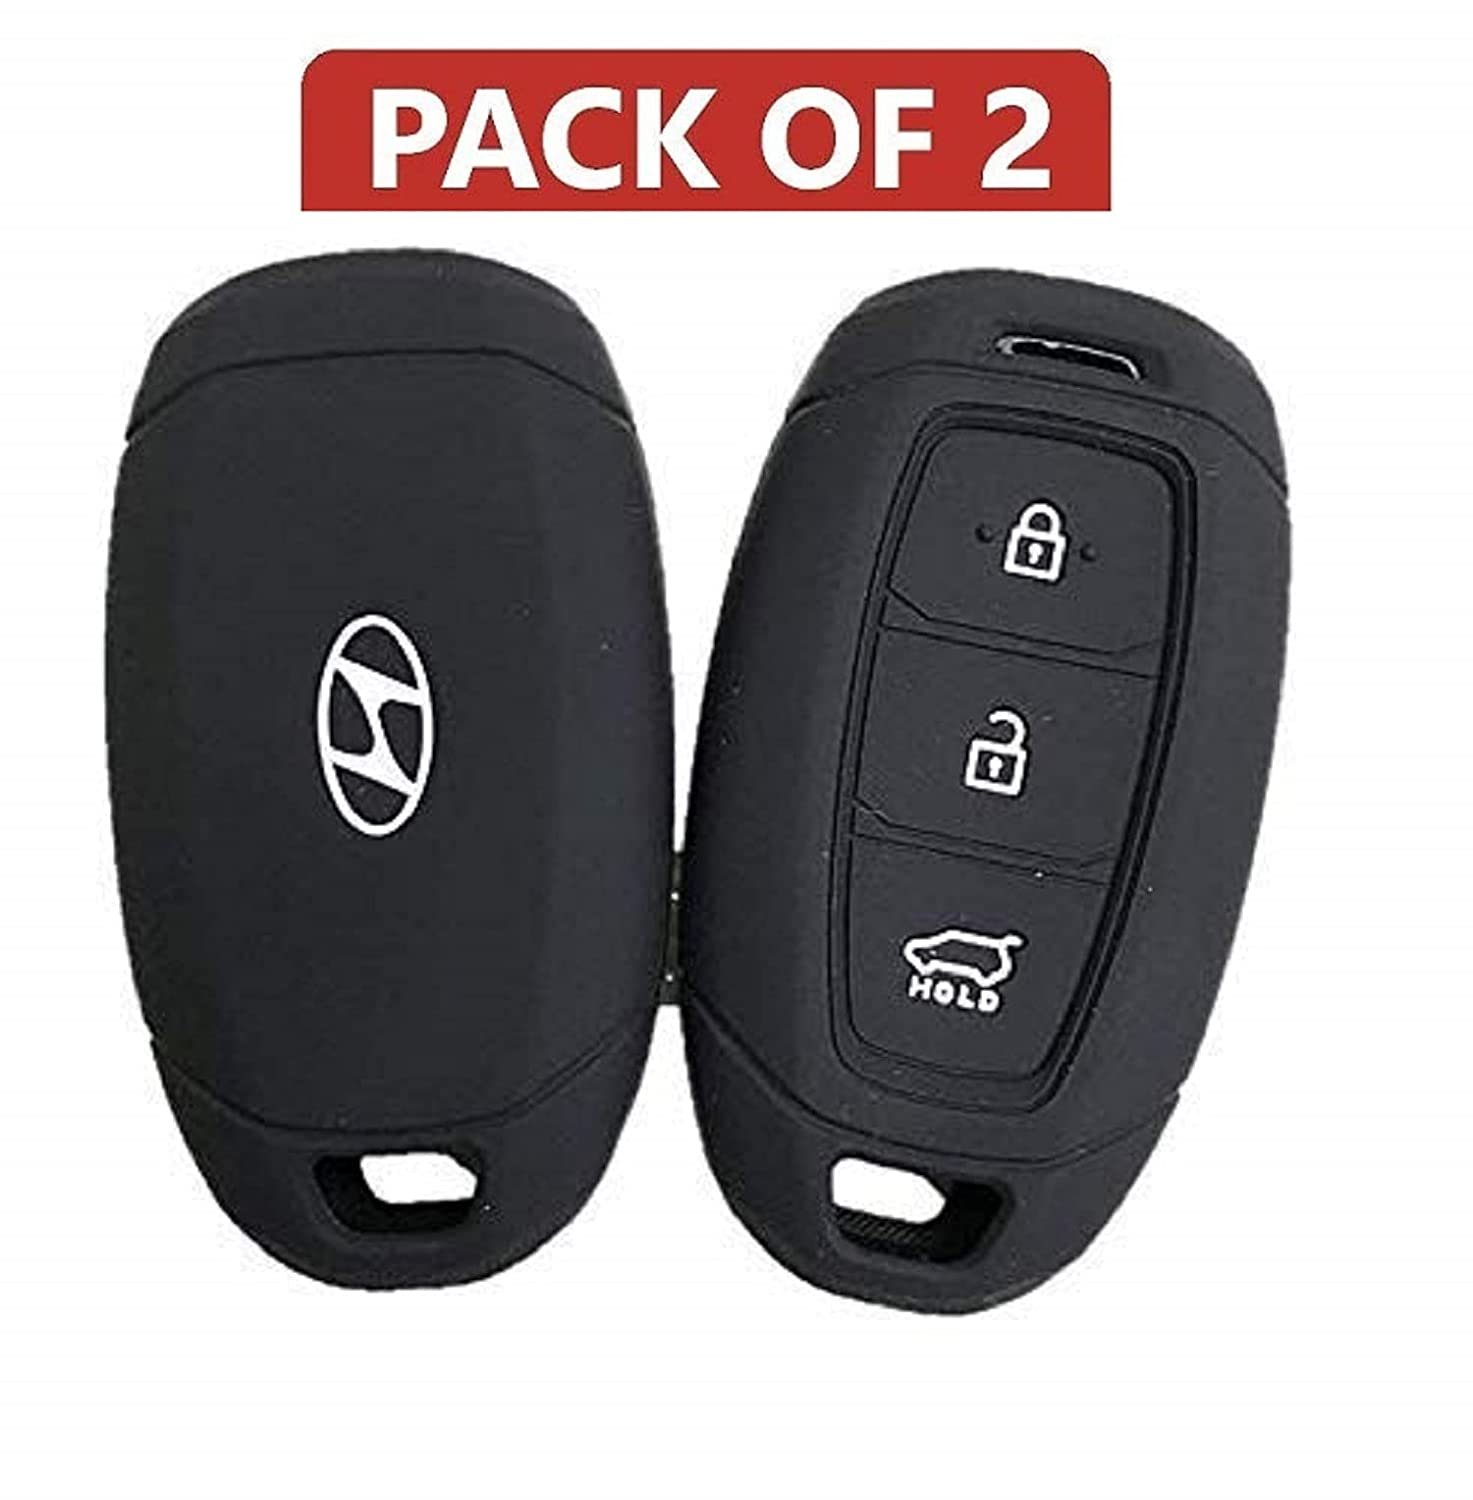 Silicone Remote Key Cover Compatible with Hyundai Verna 2017 Onwards 3 Button Push Button Start (Black, Pack of 2) Image